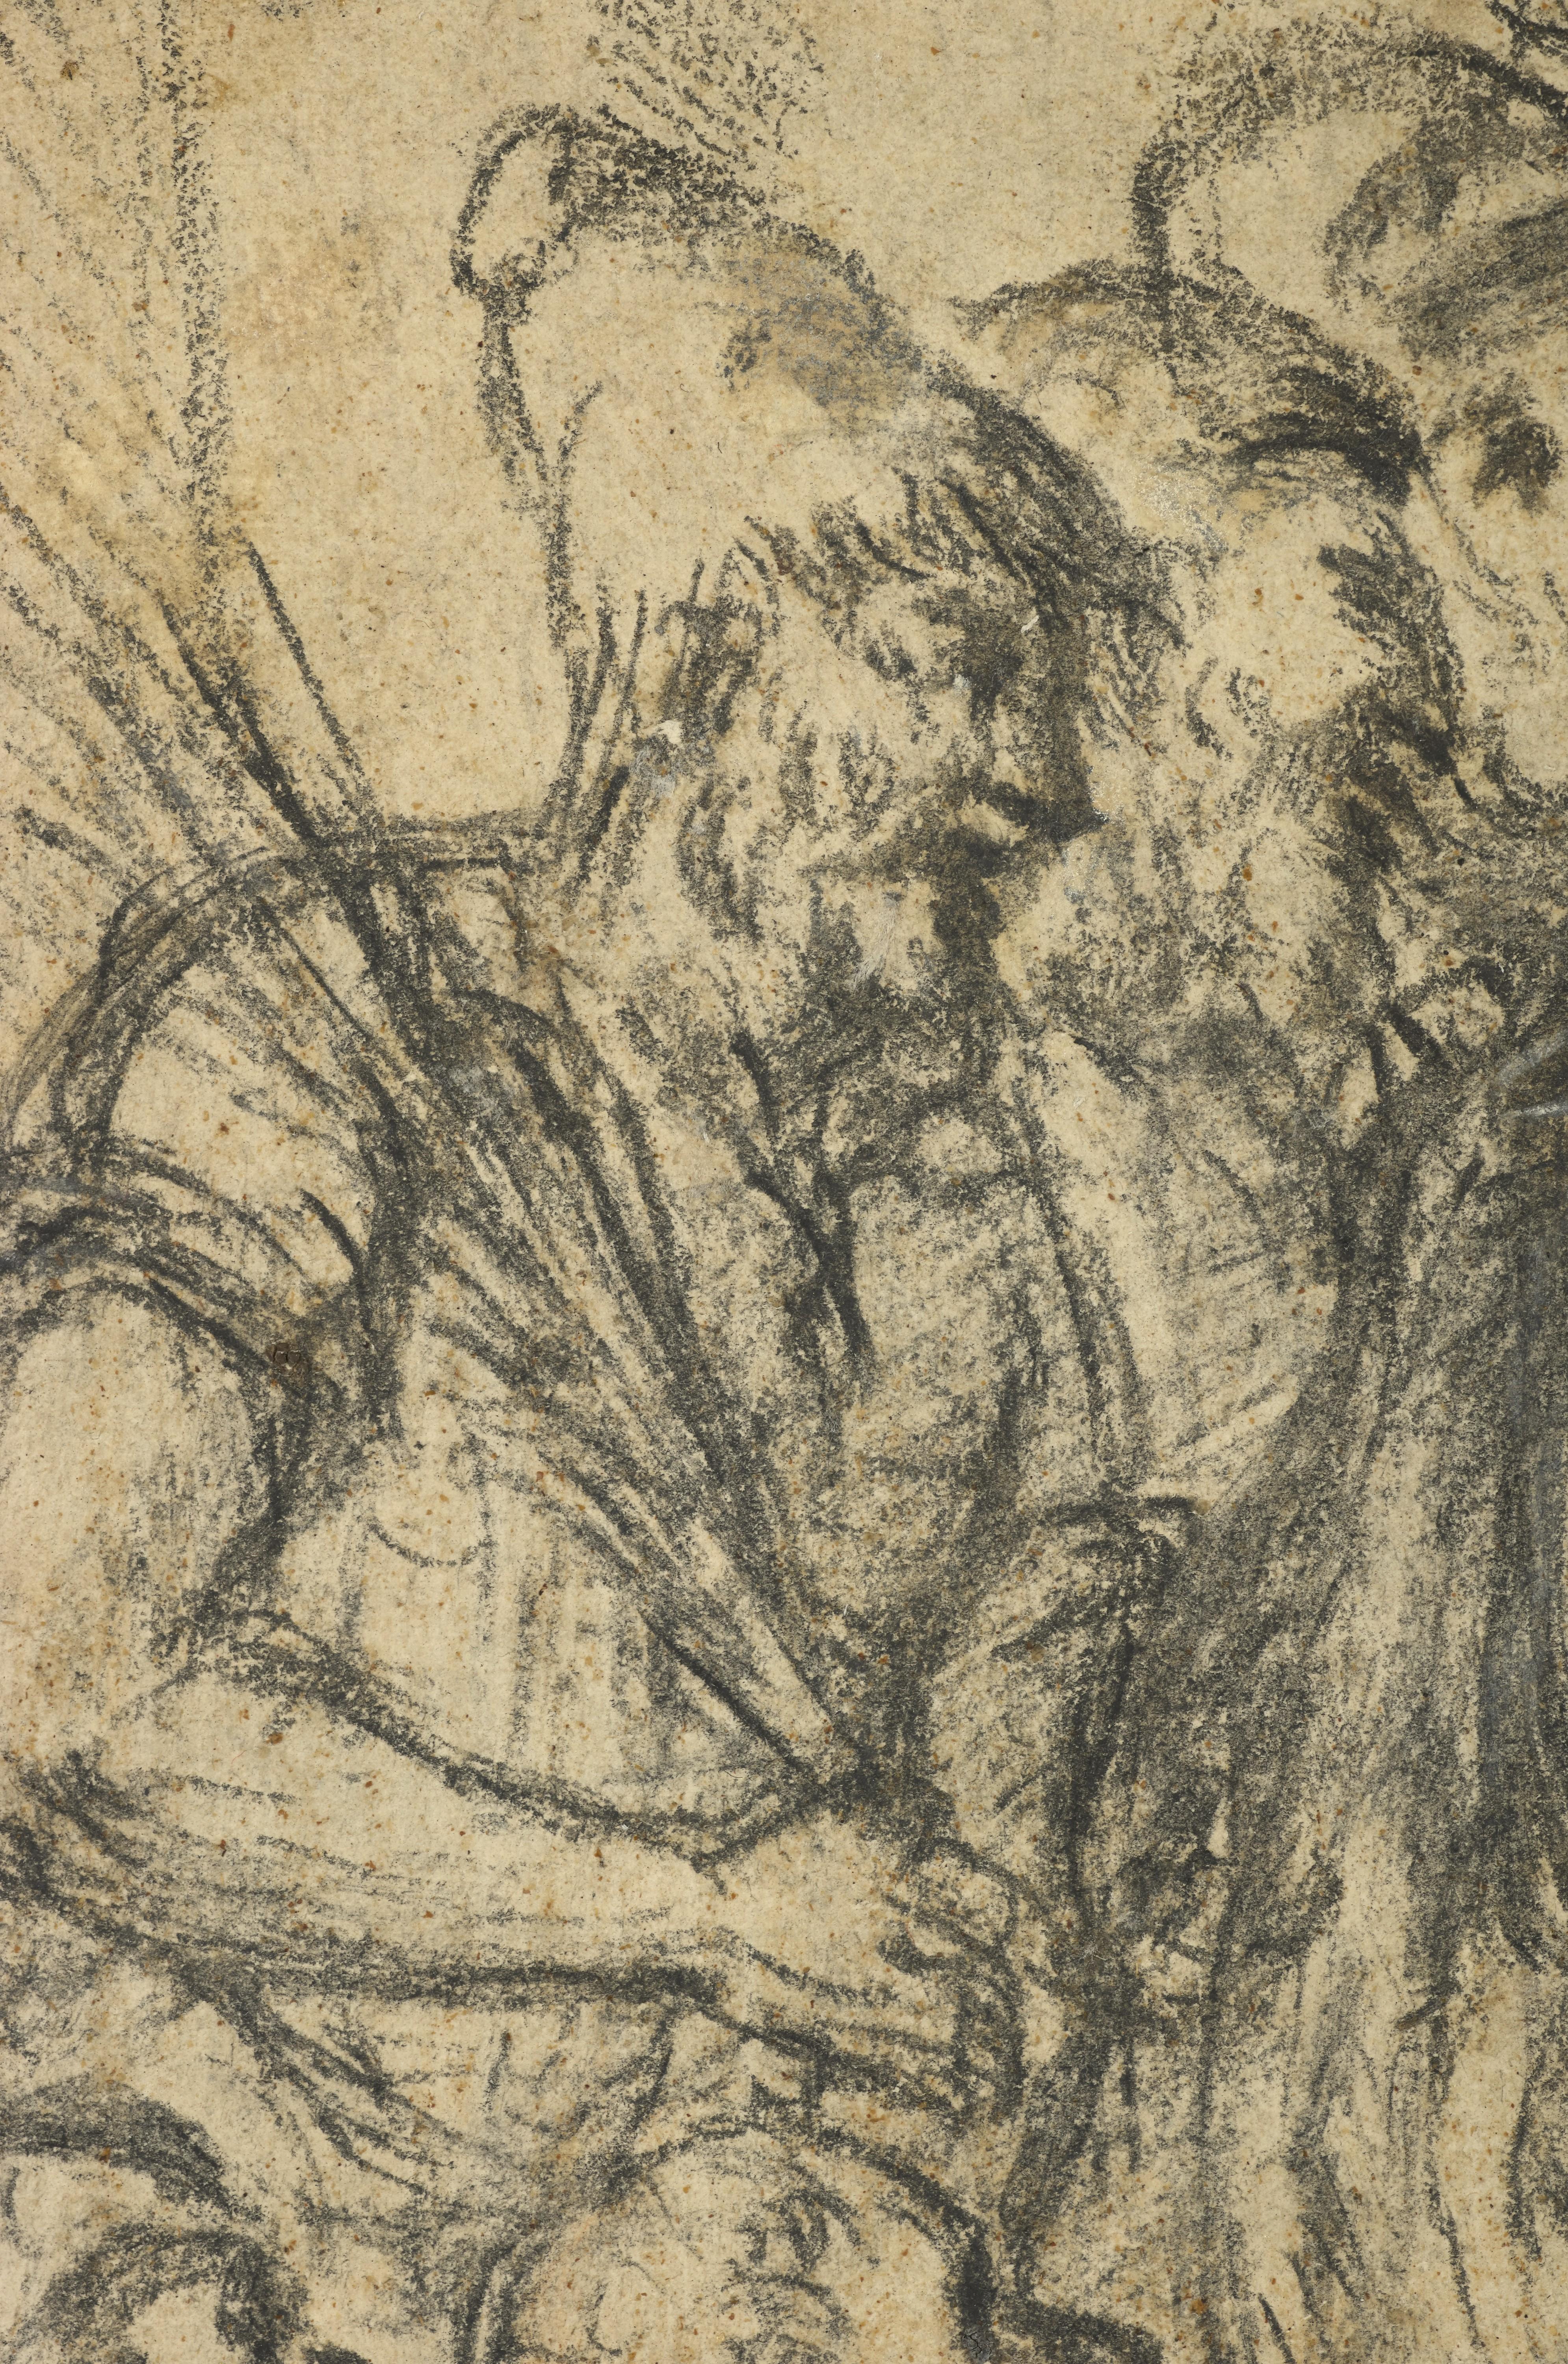 This vigorous drawing is clearly inspired by the numerous compositions on the Ecce Homo theme which were produced by Titian and his workshop at the painter's maturity. However, the number of characters and their expressionist treatment, the many